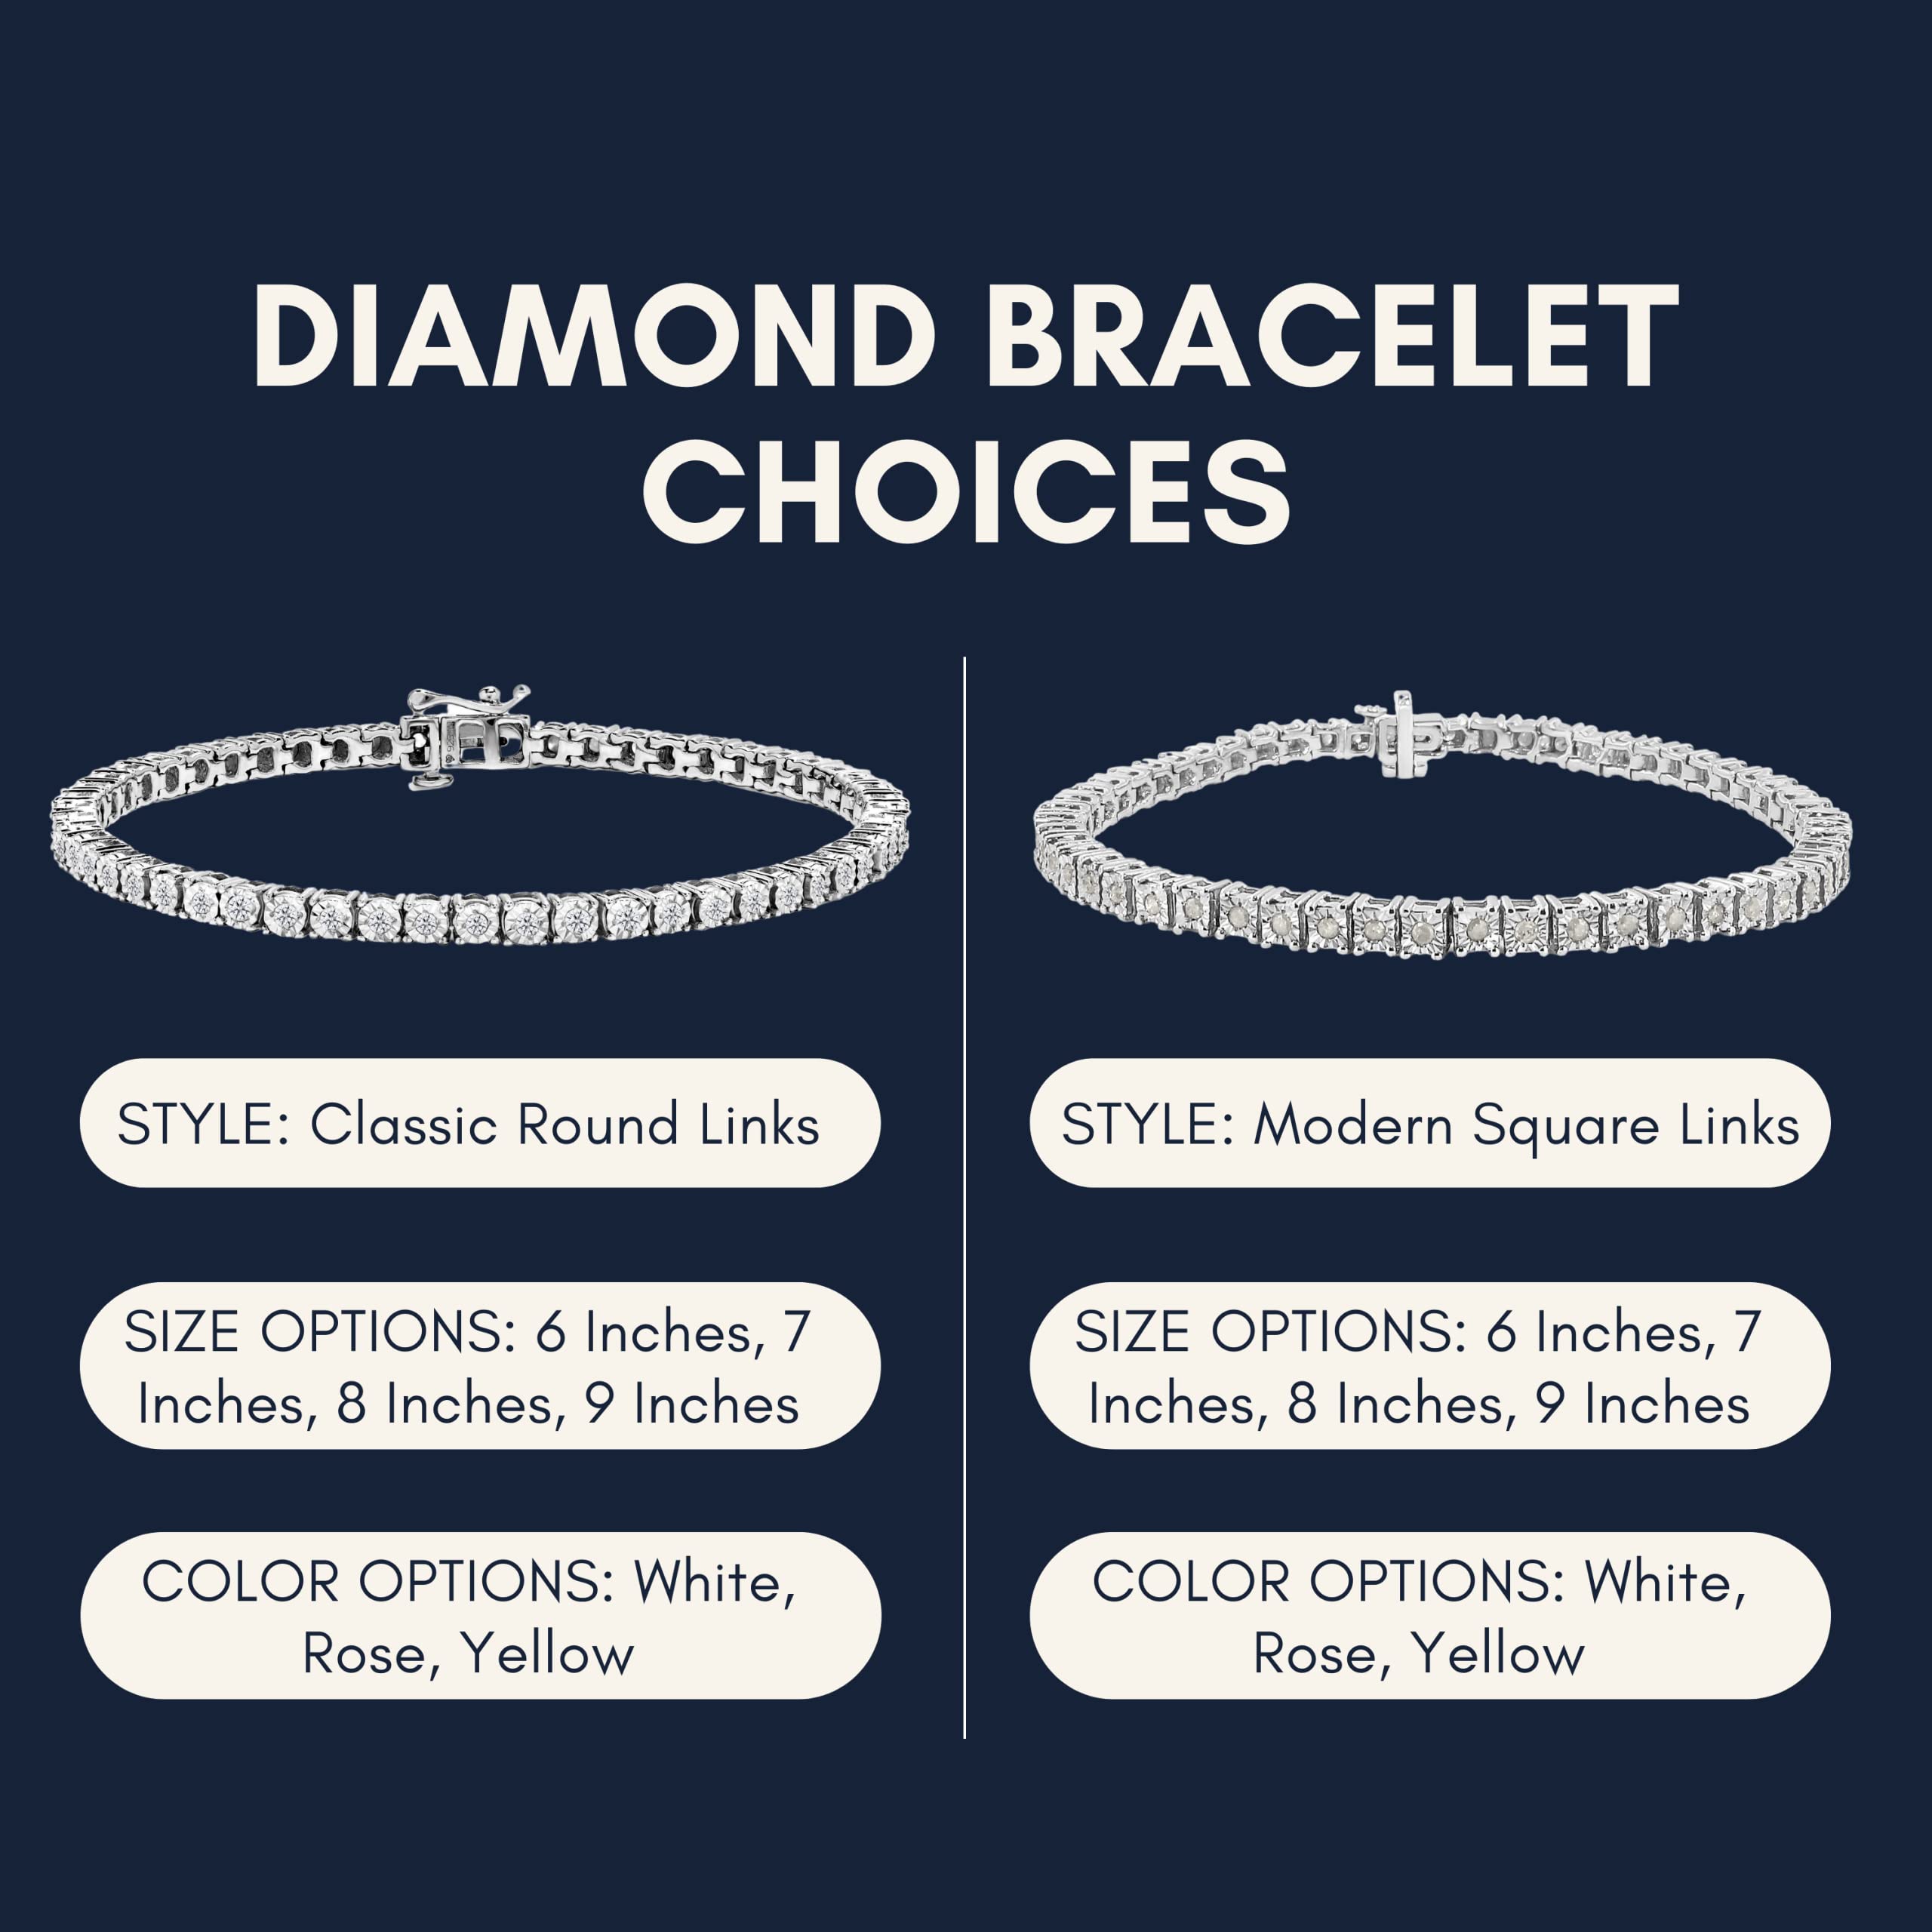 Original Classics 1.0 Cttw Miracle-Set Diamond Round Faceted Bezel Tennis Bracelet Sterling Silver (I-J, I3) - Choice of Metal Color and Size